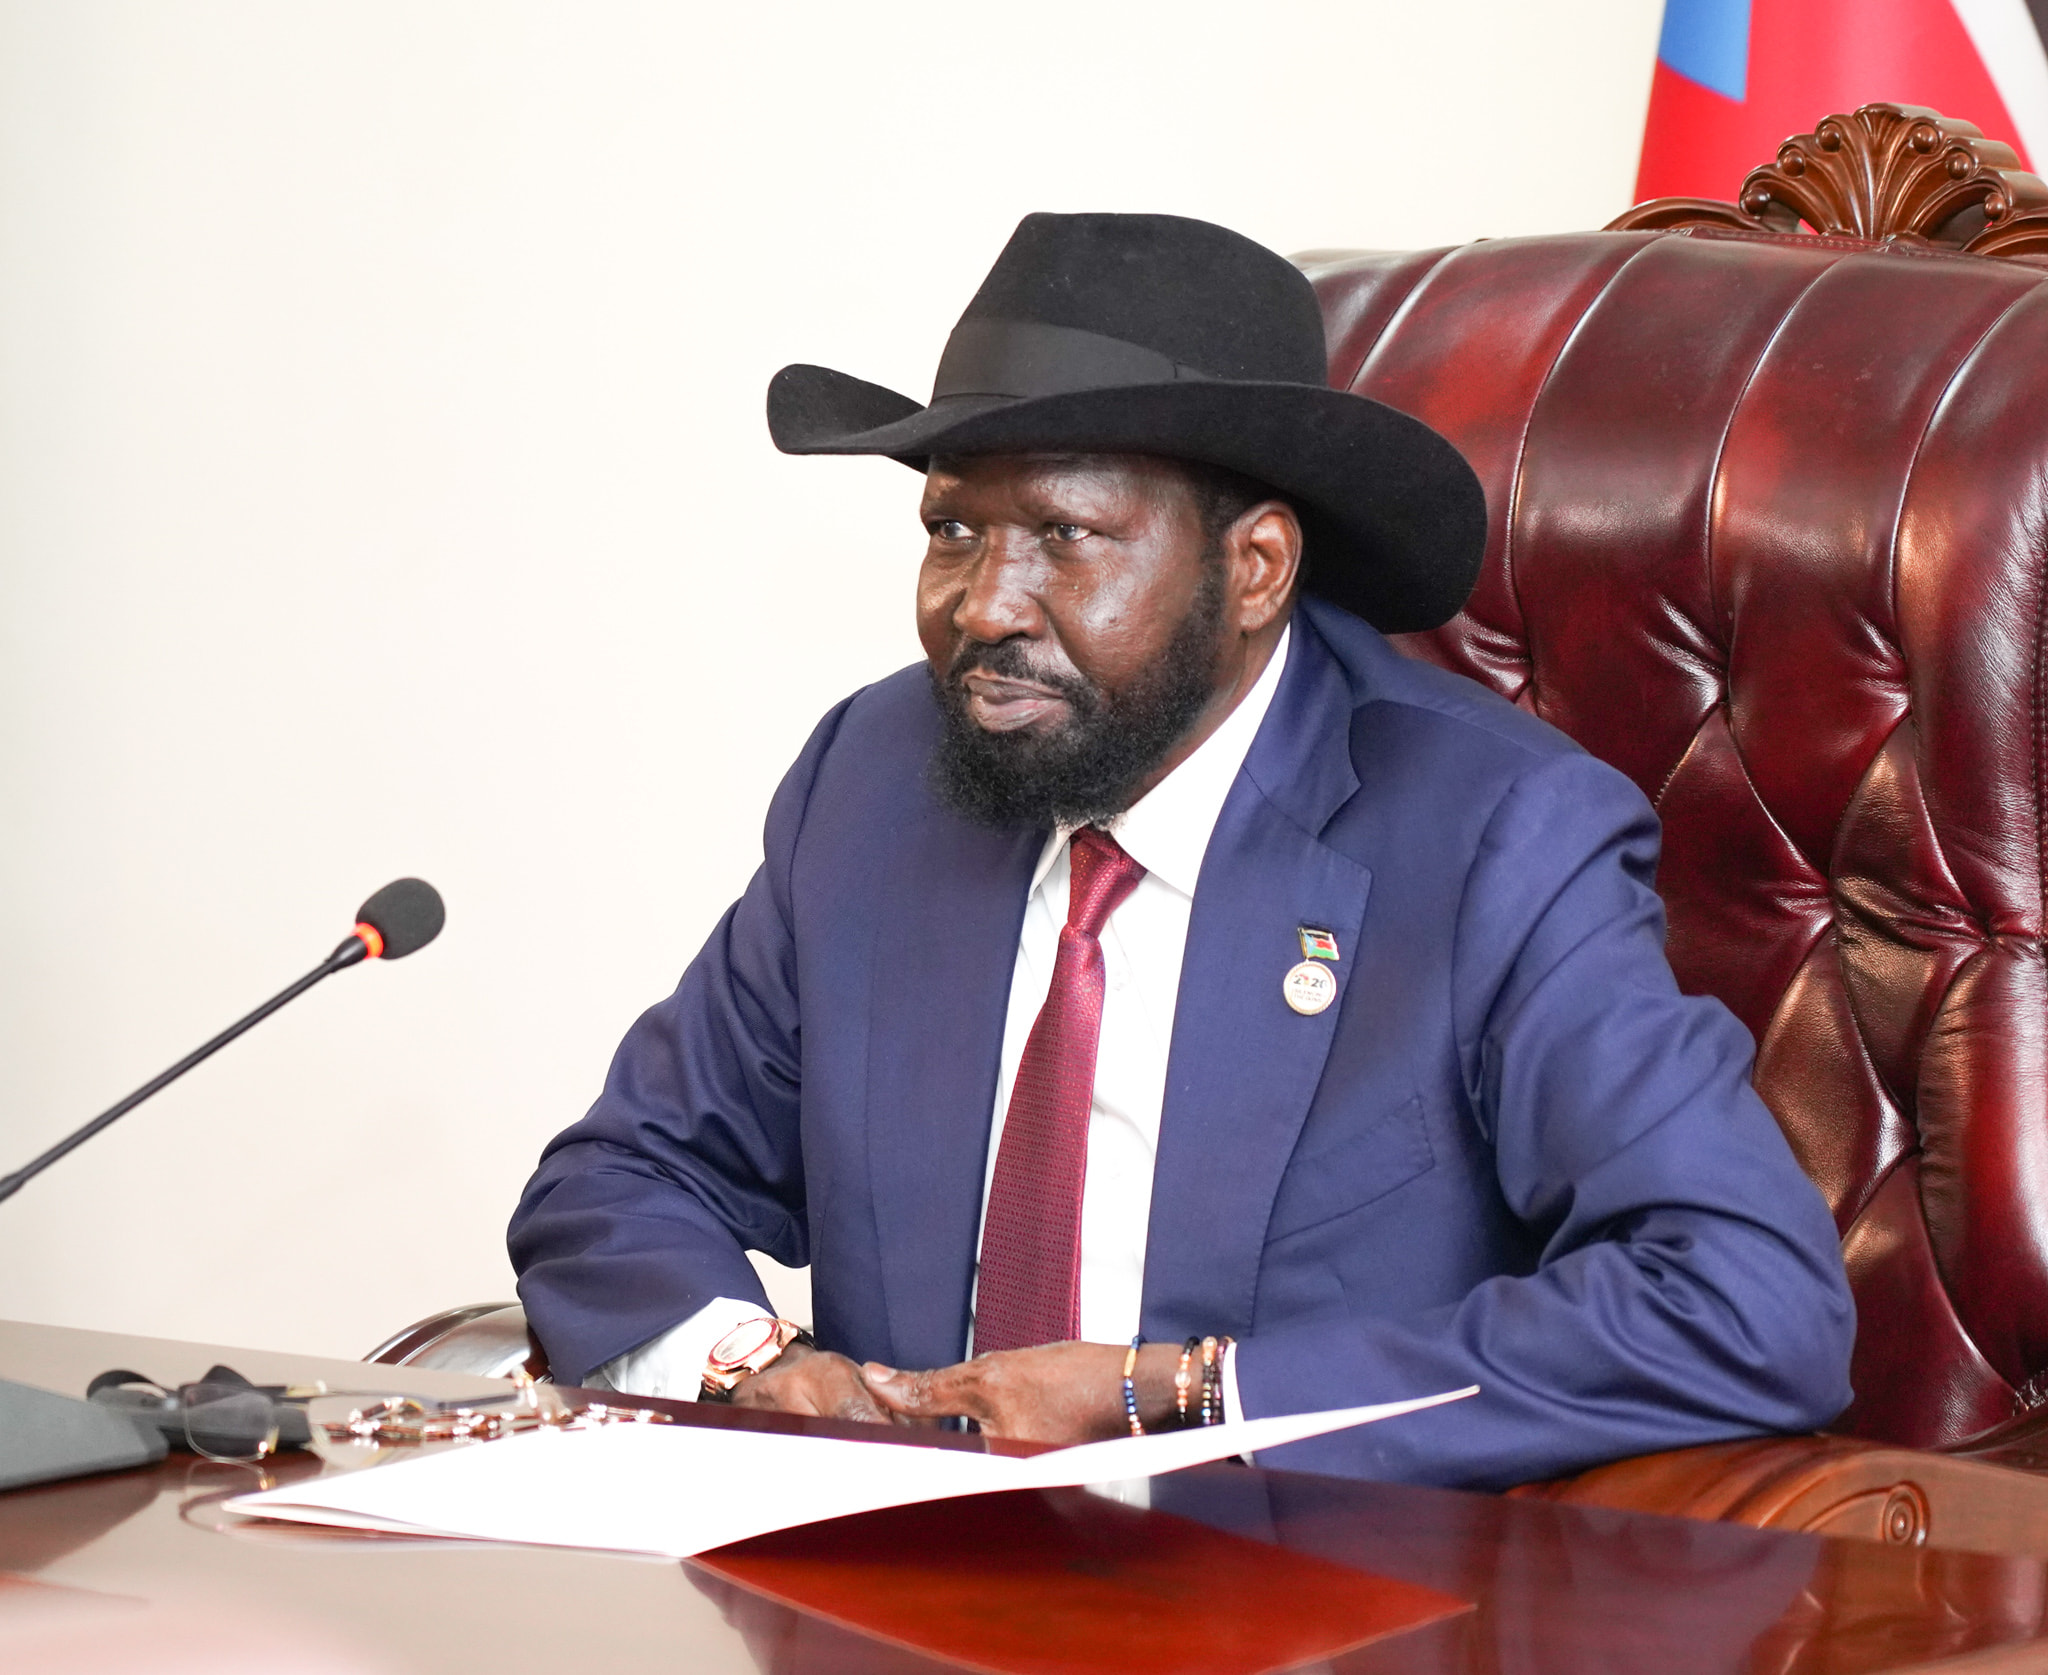 SPLM questions and issues that may need answers for sustainable peace